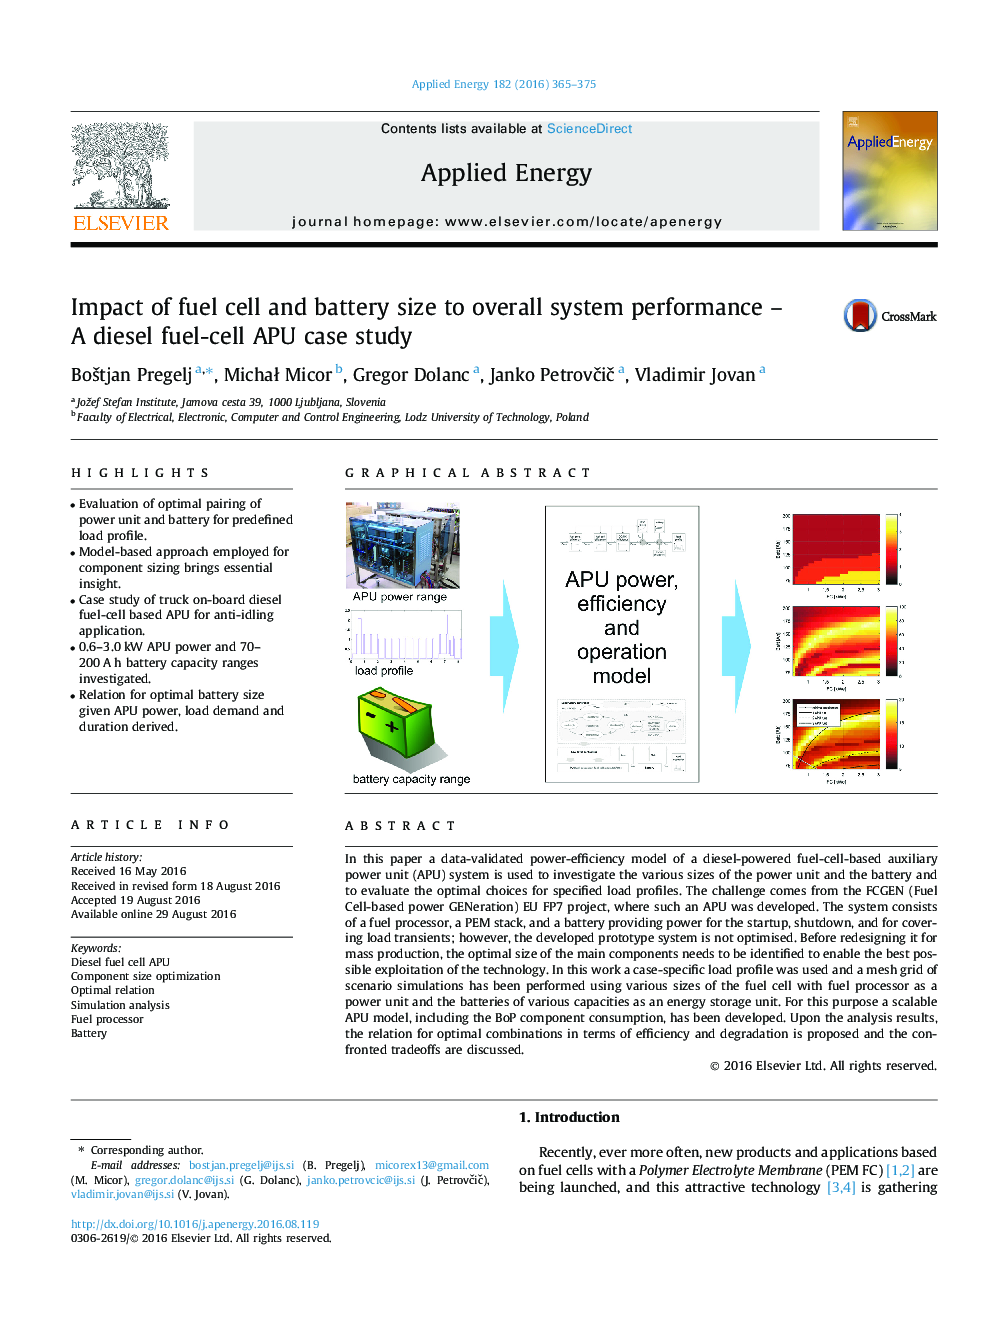 Impact of fuel cell and battery size to overall system performance - A diesel fuel-cell APU case study